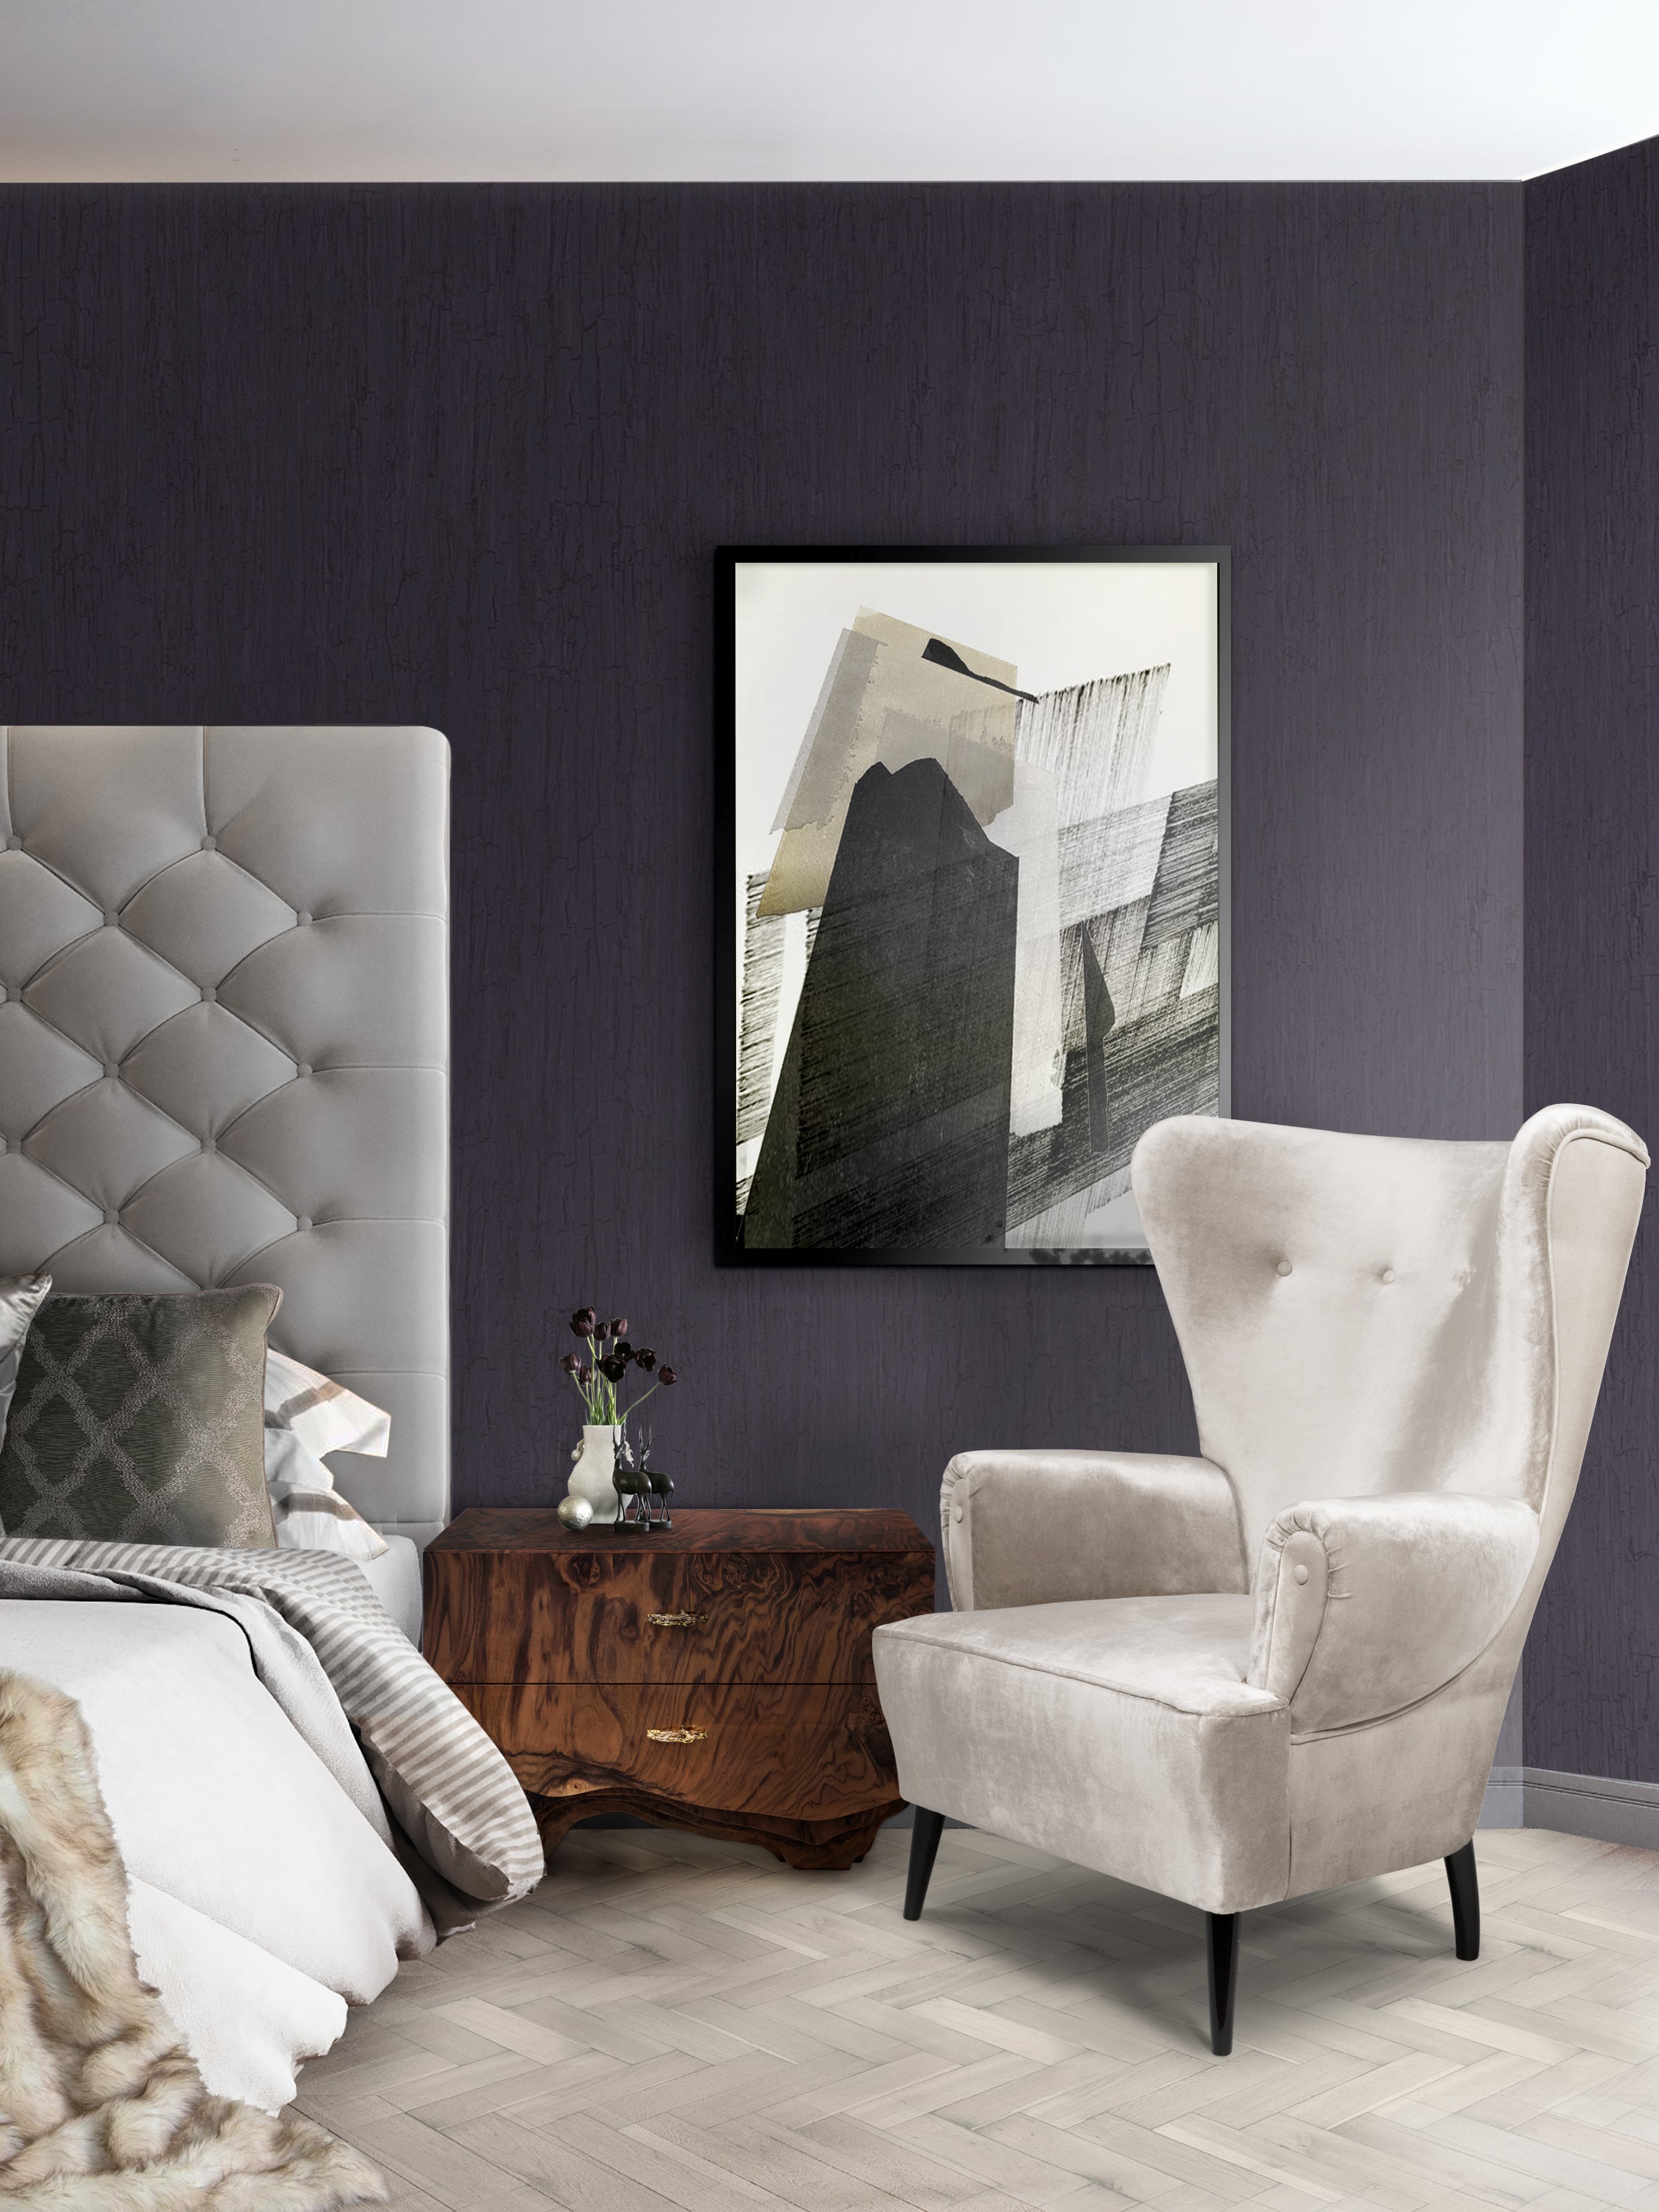 Master Bedroom With Purple And Neutral Tones - Home'Society